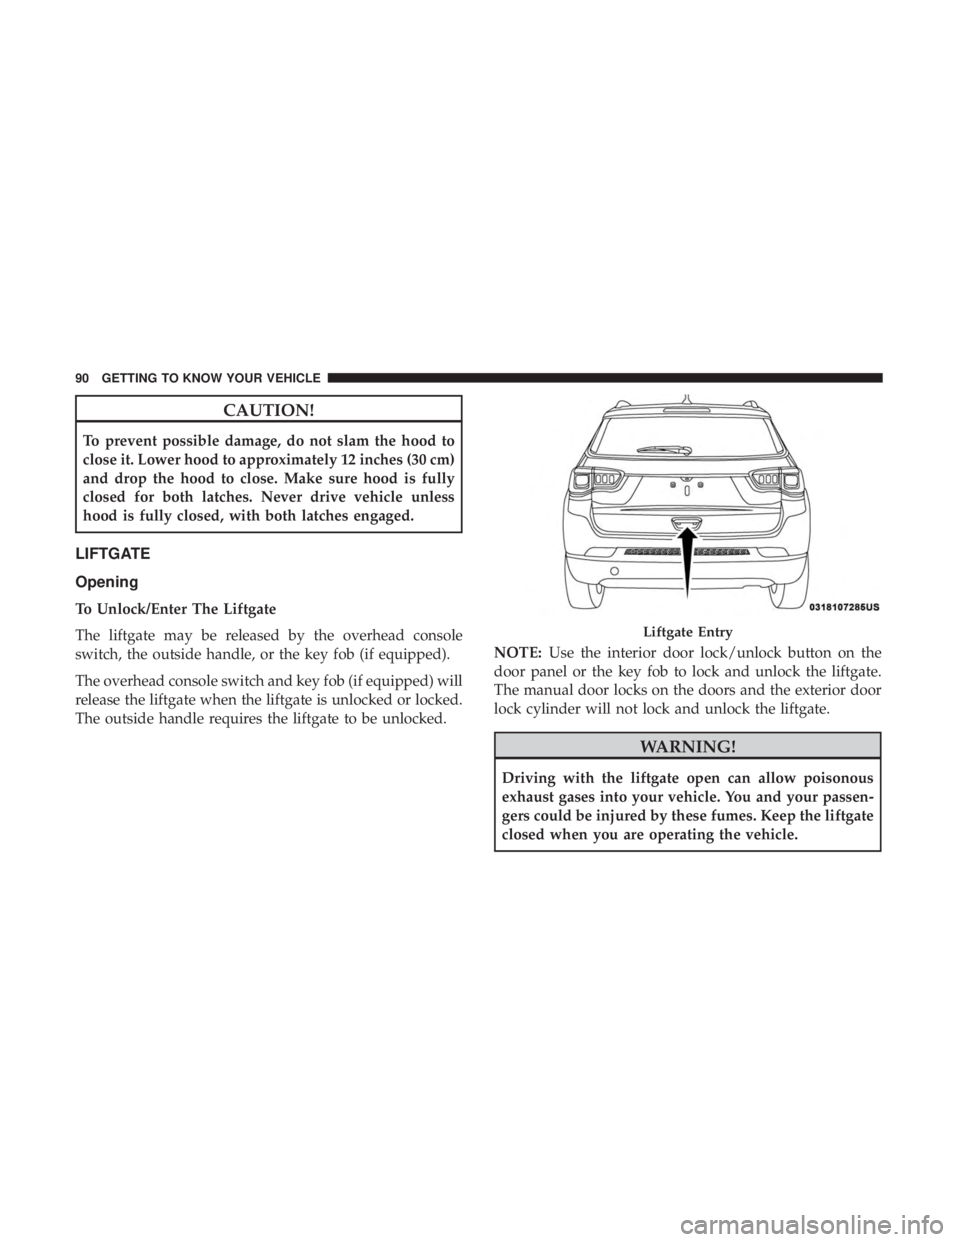 JEEP COMPASS TRAILHAWK 2018  Owners Manual CAUTION!
To prevent possible damage, do not slam the hood to
close it. Lower hood to approximately 12 inches (30 cm)
and drop the hood to close. Make sure hood is fully
closed for both latches. Never 